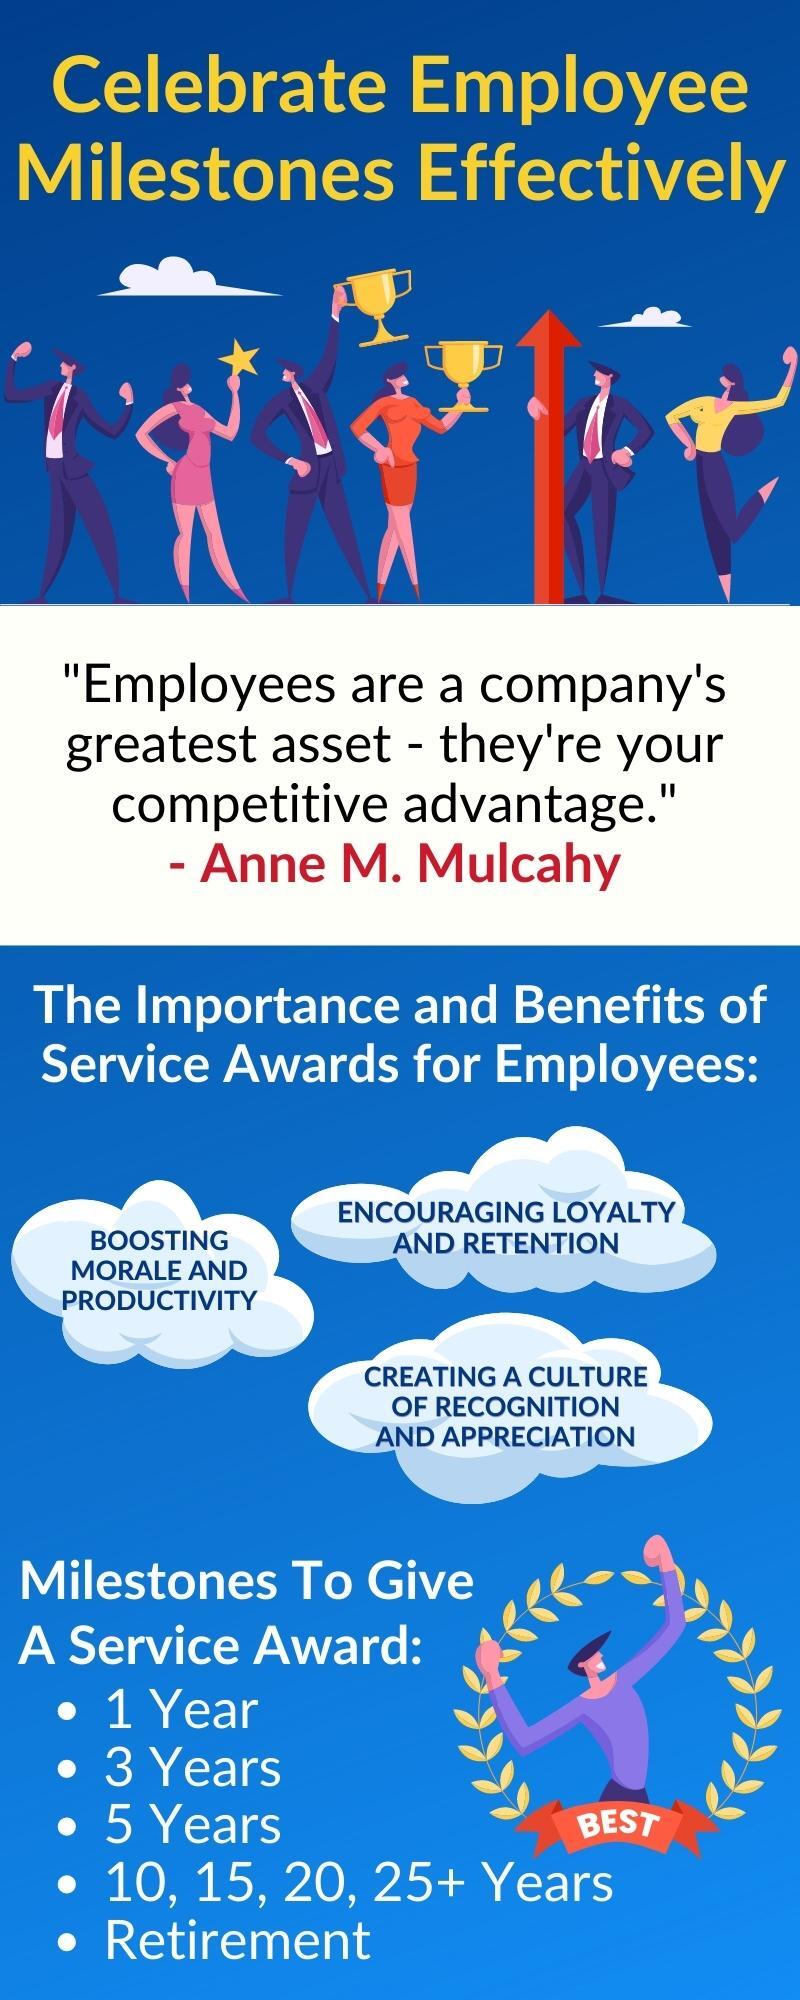 The Ultimate Guide to Years of Service Awards Ideas: Celebrate Employee Milestones Effectively
